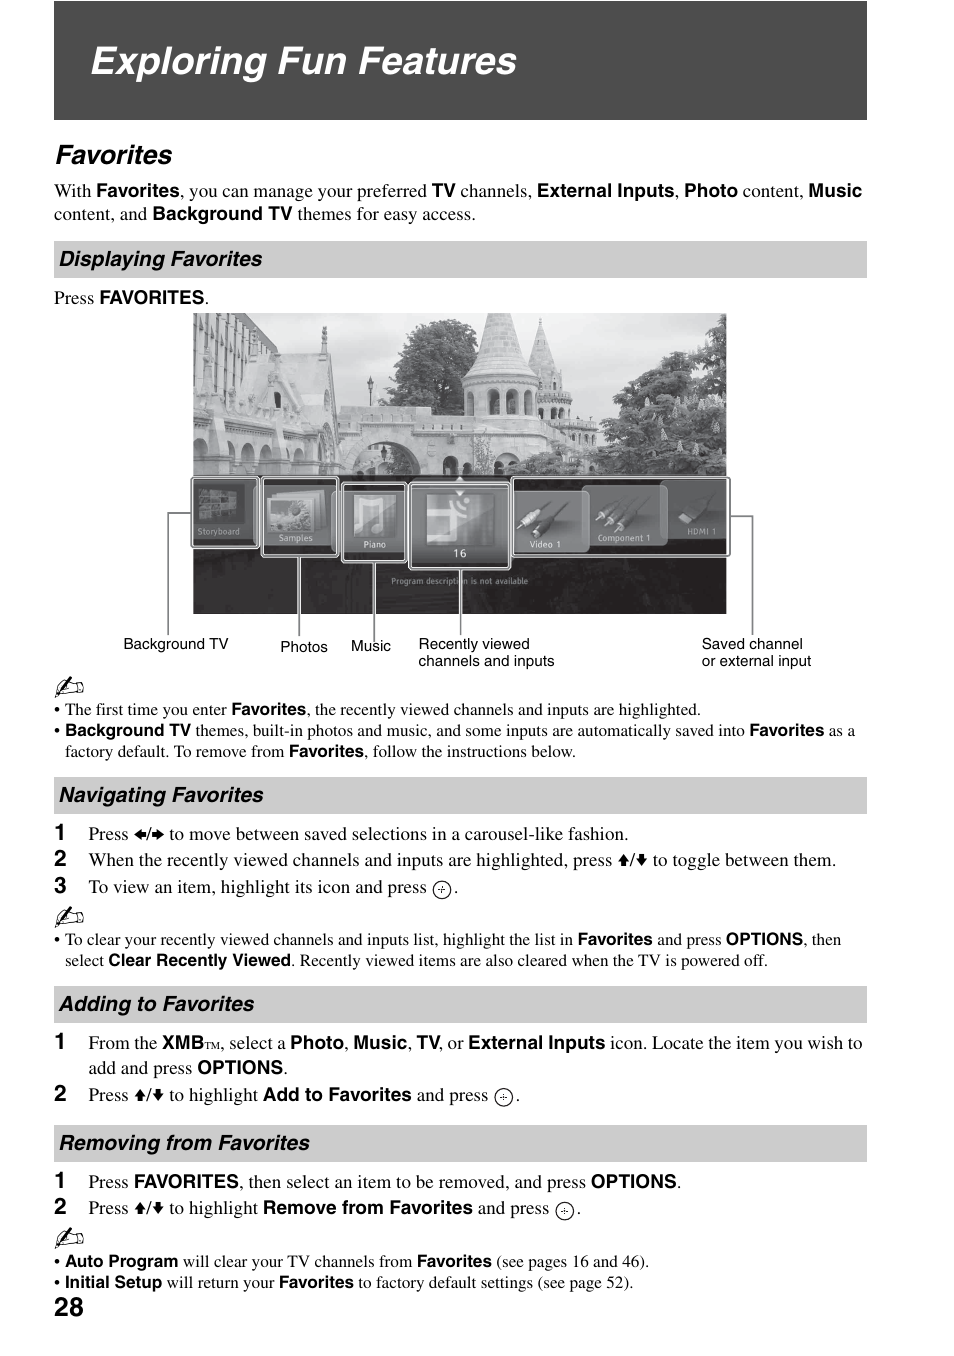 Exploring fun features, Favorites, Displaying favorites | Navigating favorites, Adding to favorites, Removing from favorites | Sony KDL-52XBR7 User Manual | Page 28 / 60